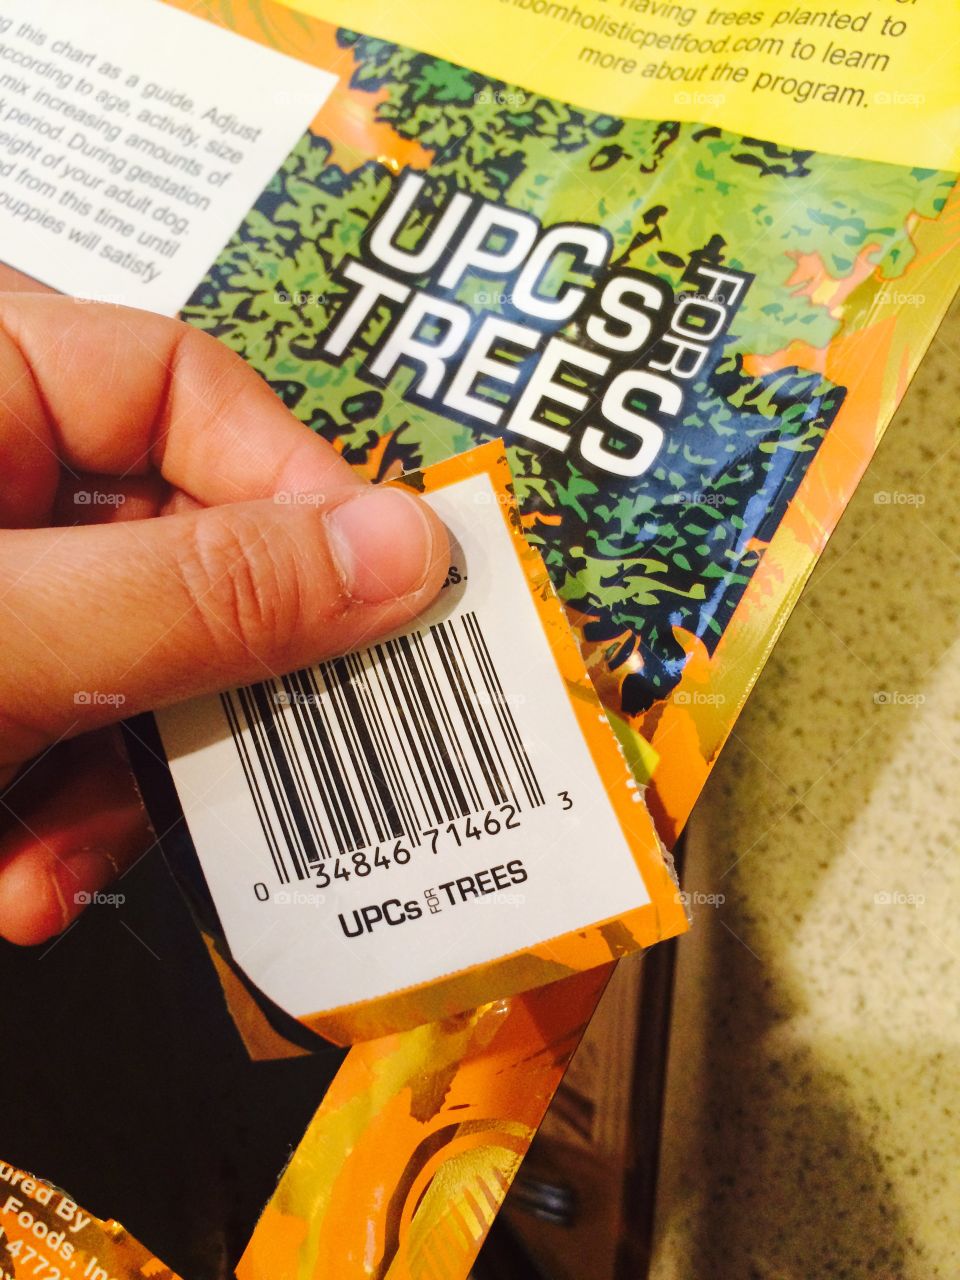 UPCs for Trees